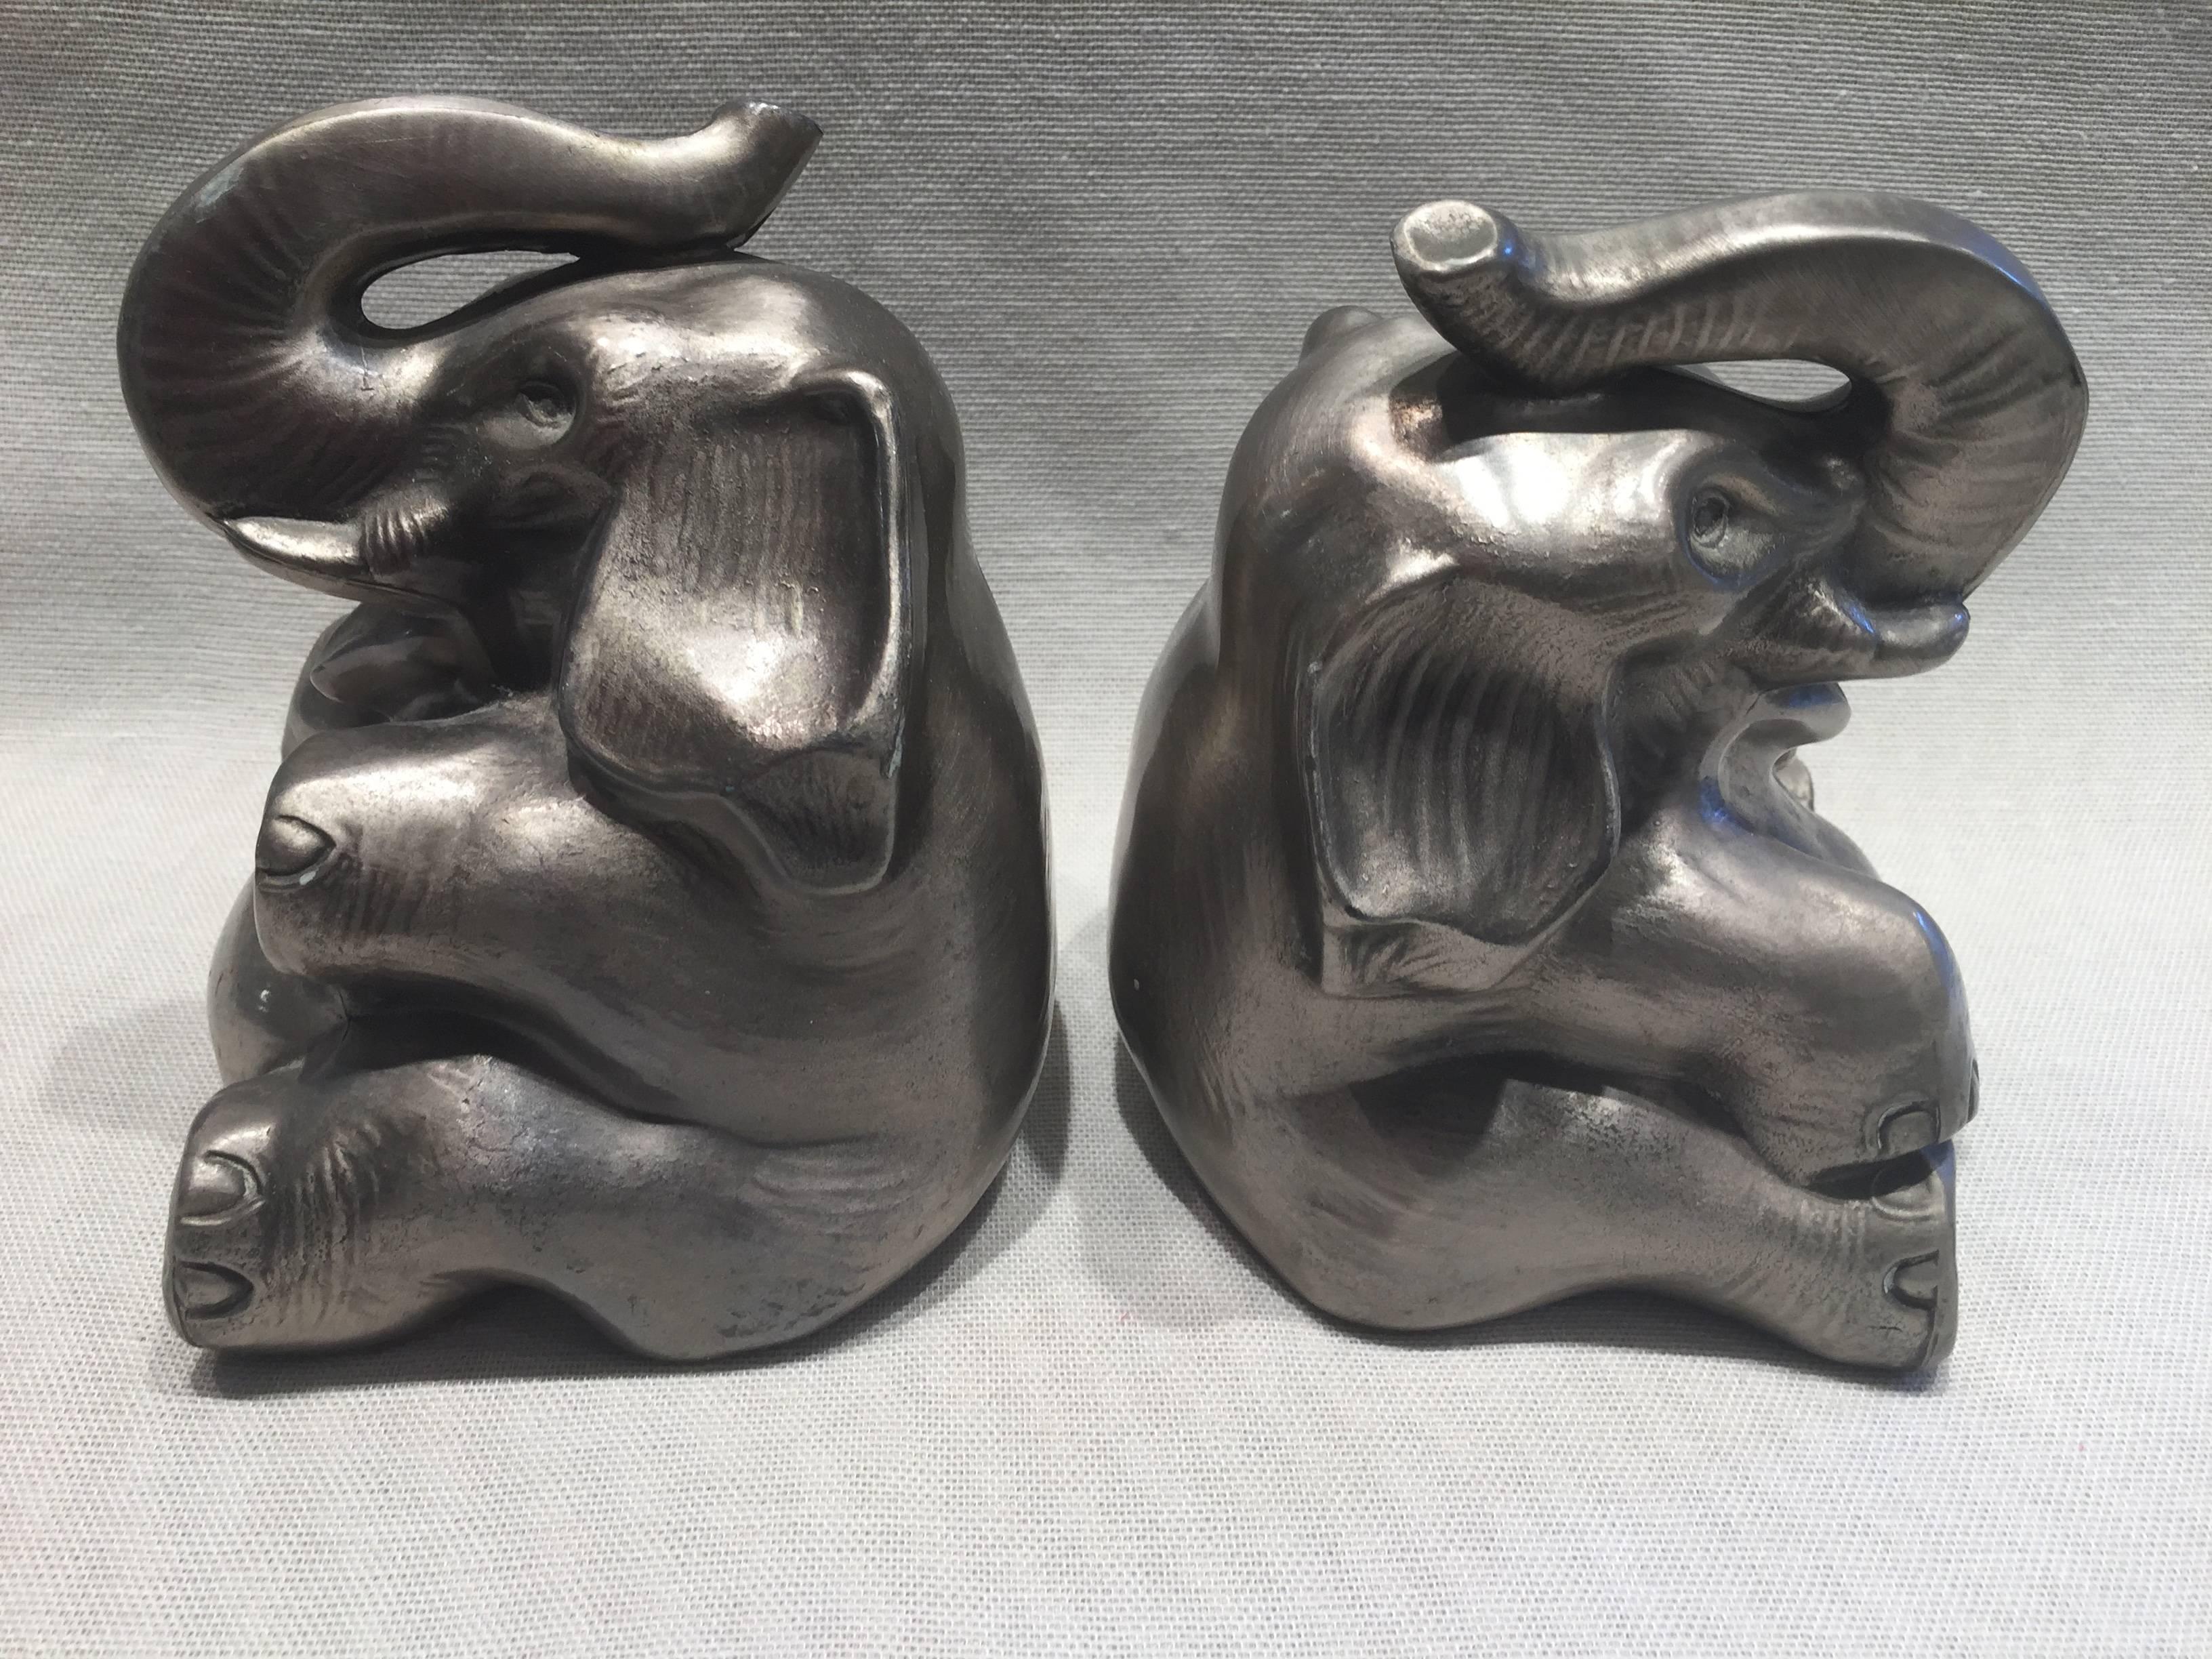 Pair of Art Deco silver finish tusk up good luck trunk Elephant bookends, lovely condition and adorable.